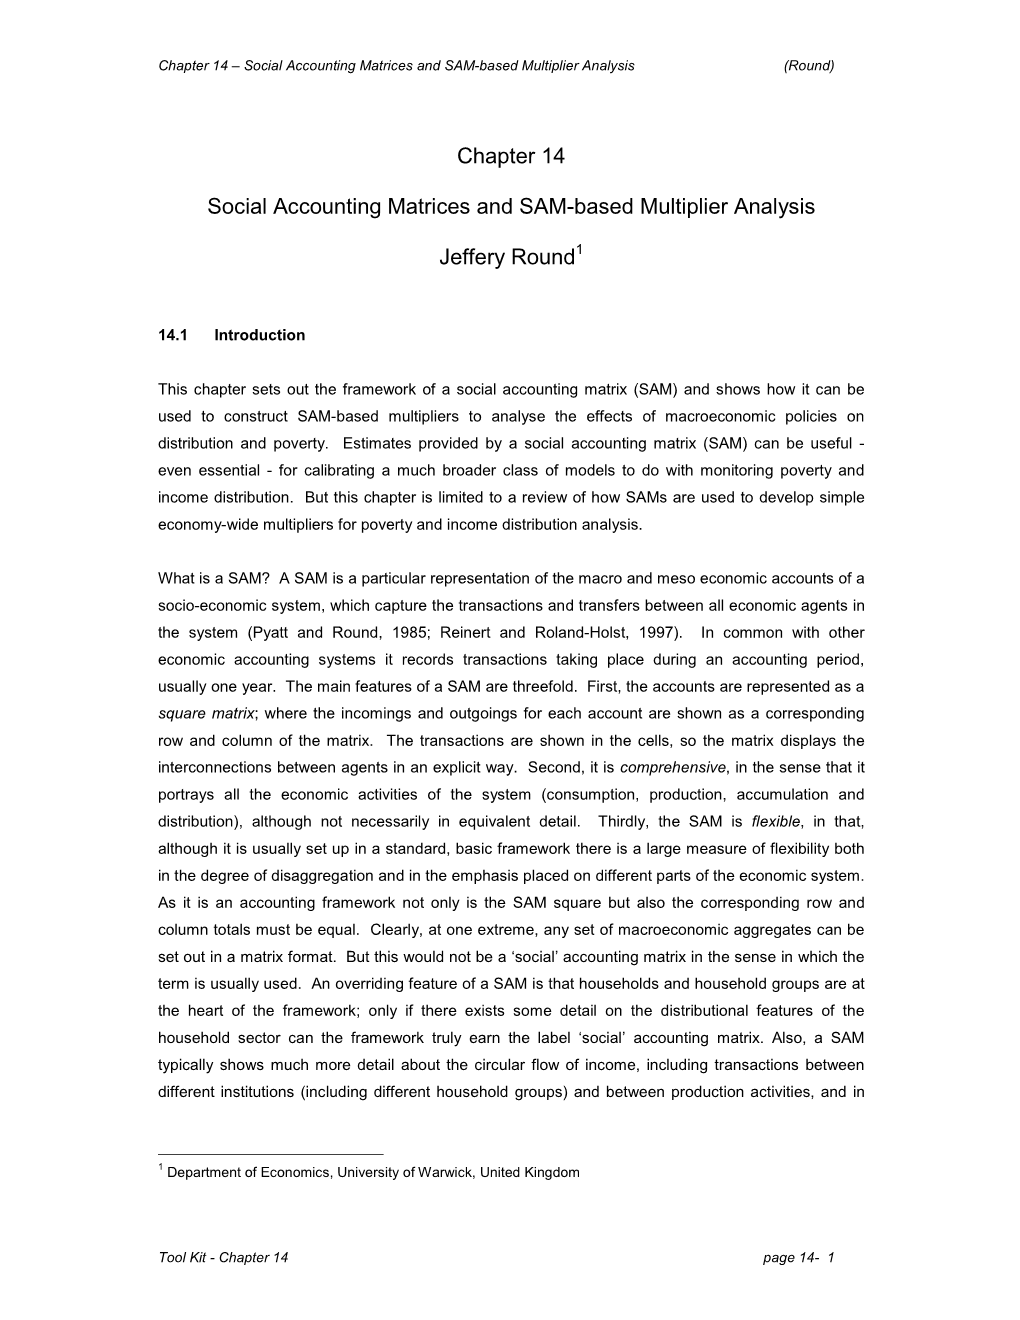 "Social Accounting Matrices and SAM-Based Multiplier Analysis"